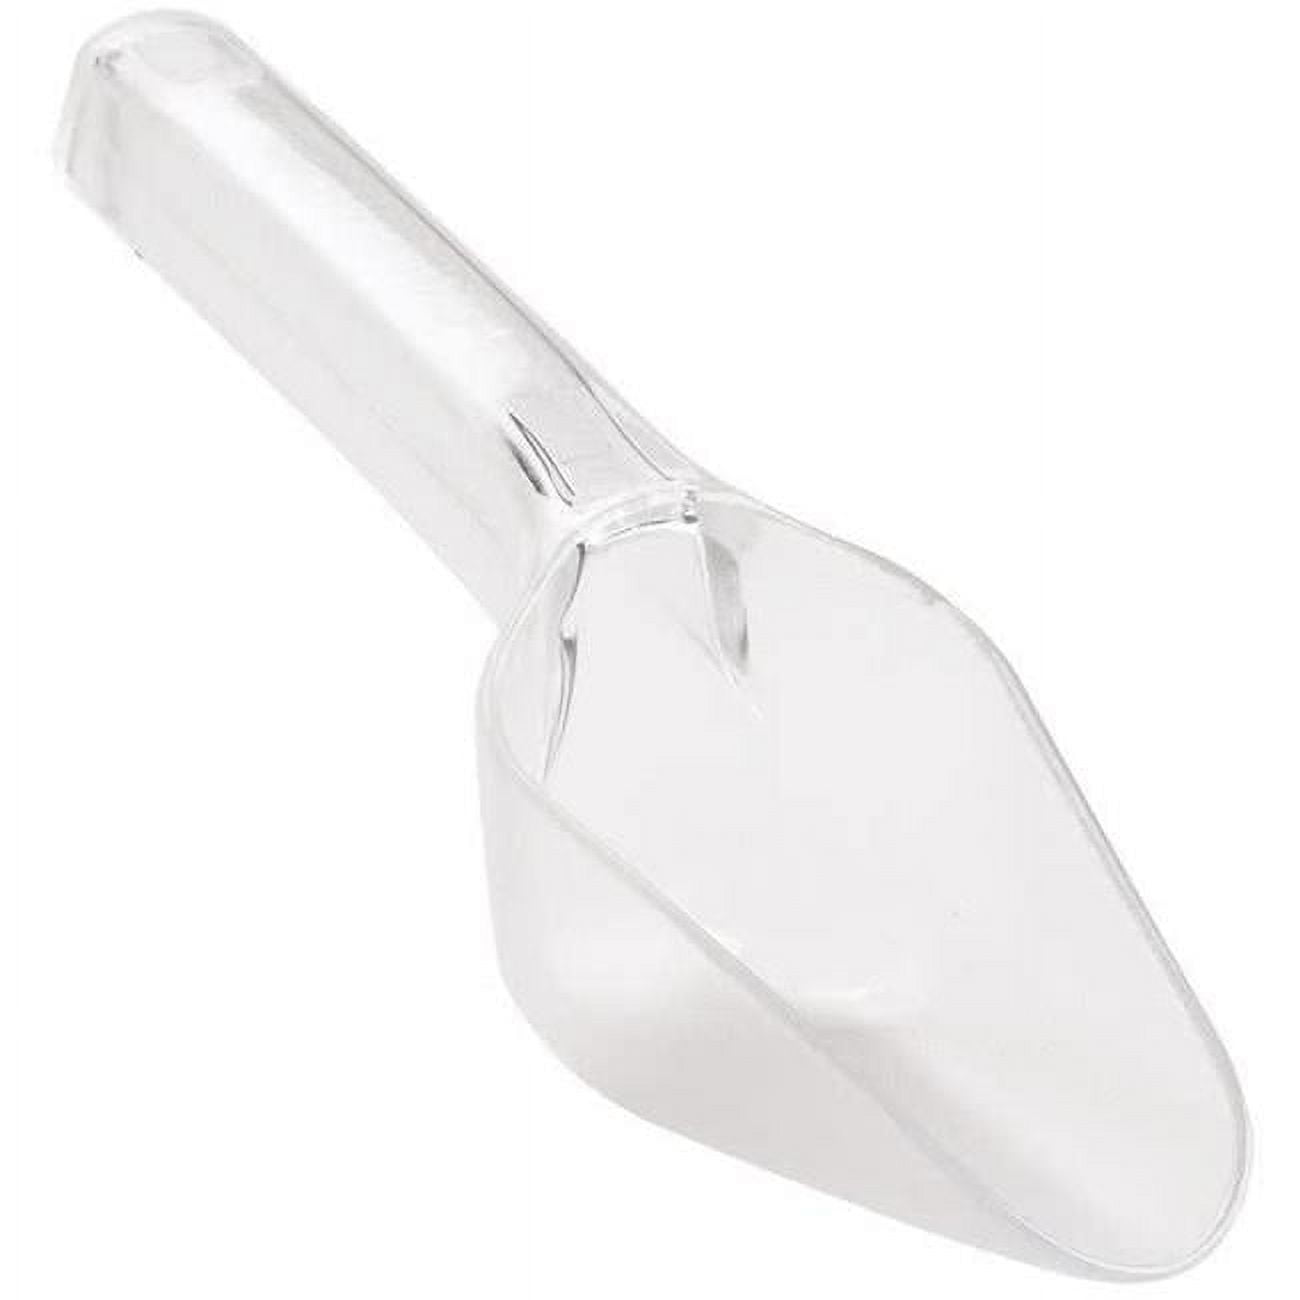 1029-3s 3 Oz Clear Classic Polycarbonate Scoop With Short Handle